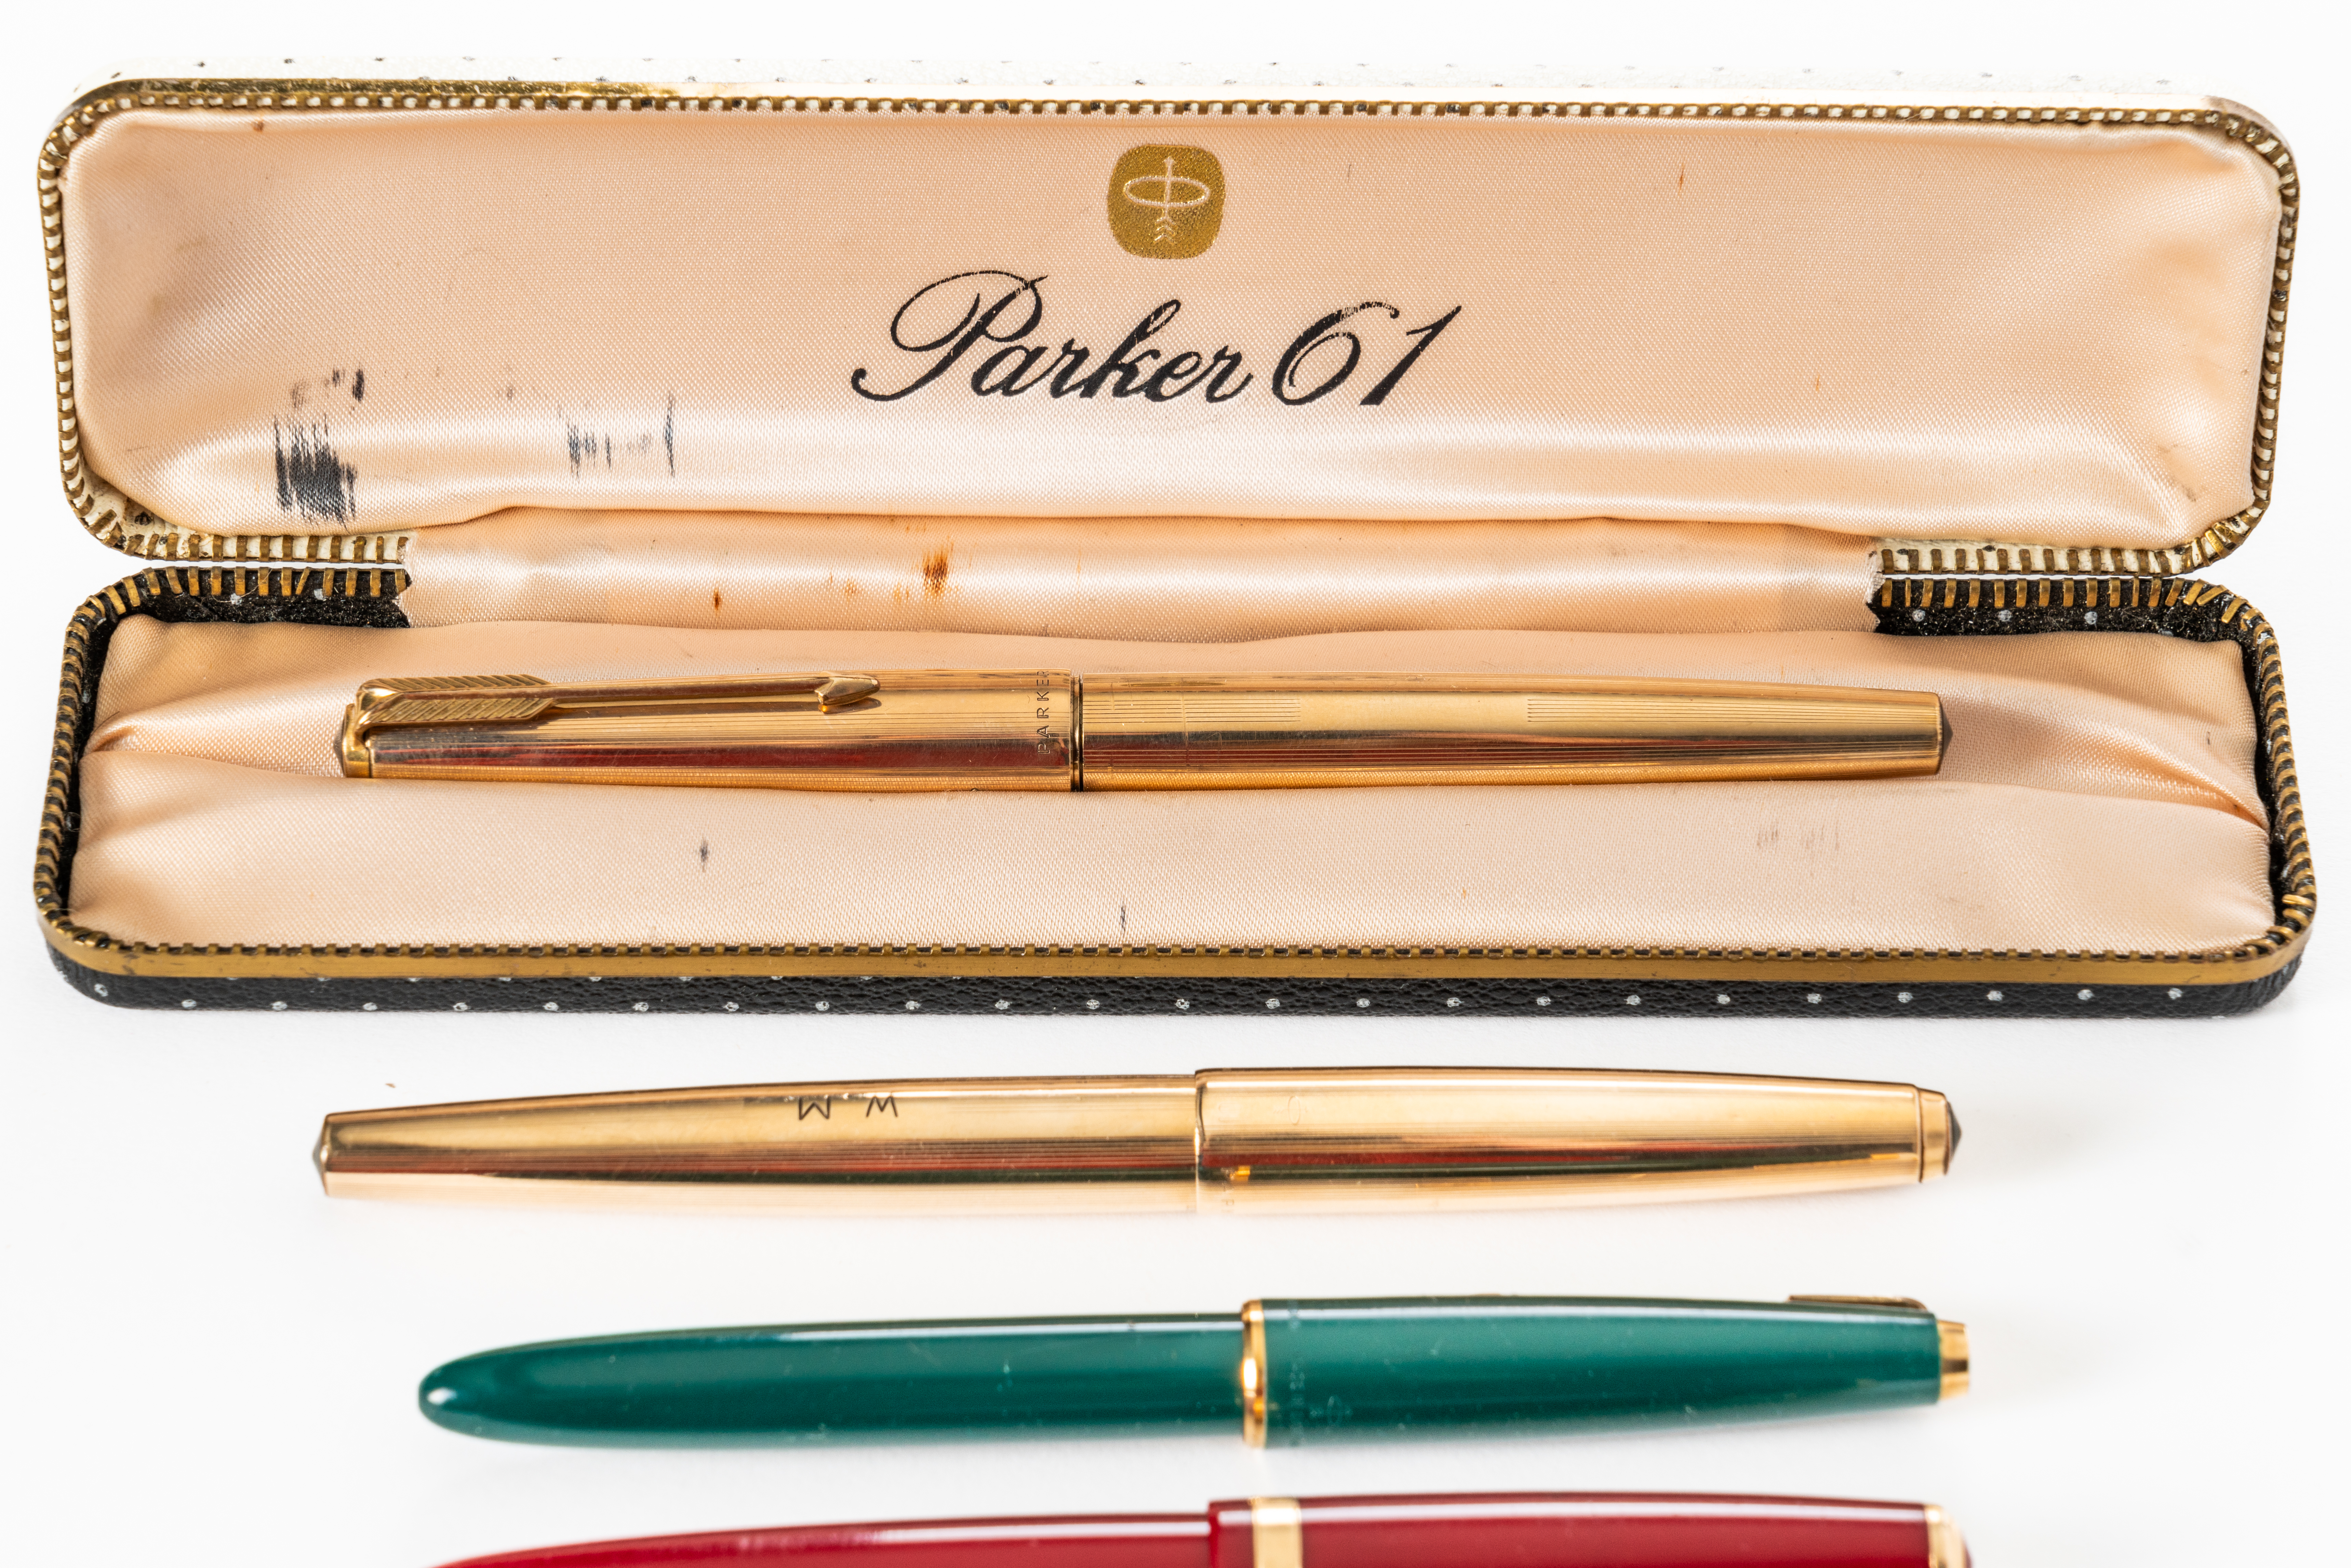 A COLLECTION OF VINTAGE PENS INCLUDING A PARKER 61 FOUNTAIN PEN IN BOX (7) - Image 5 of 5